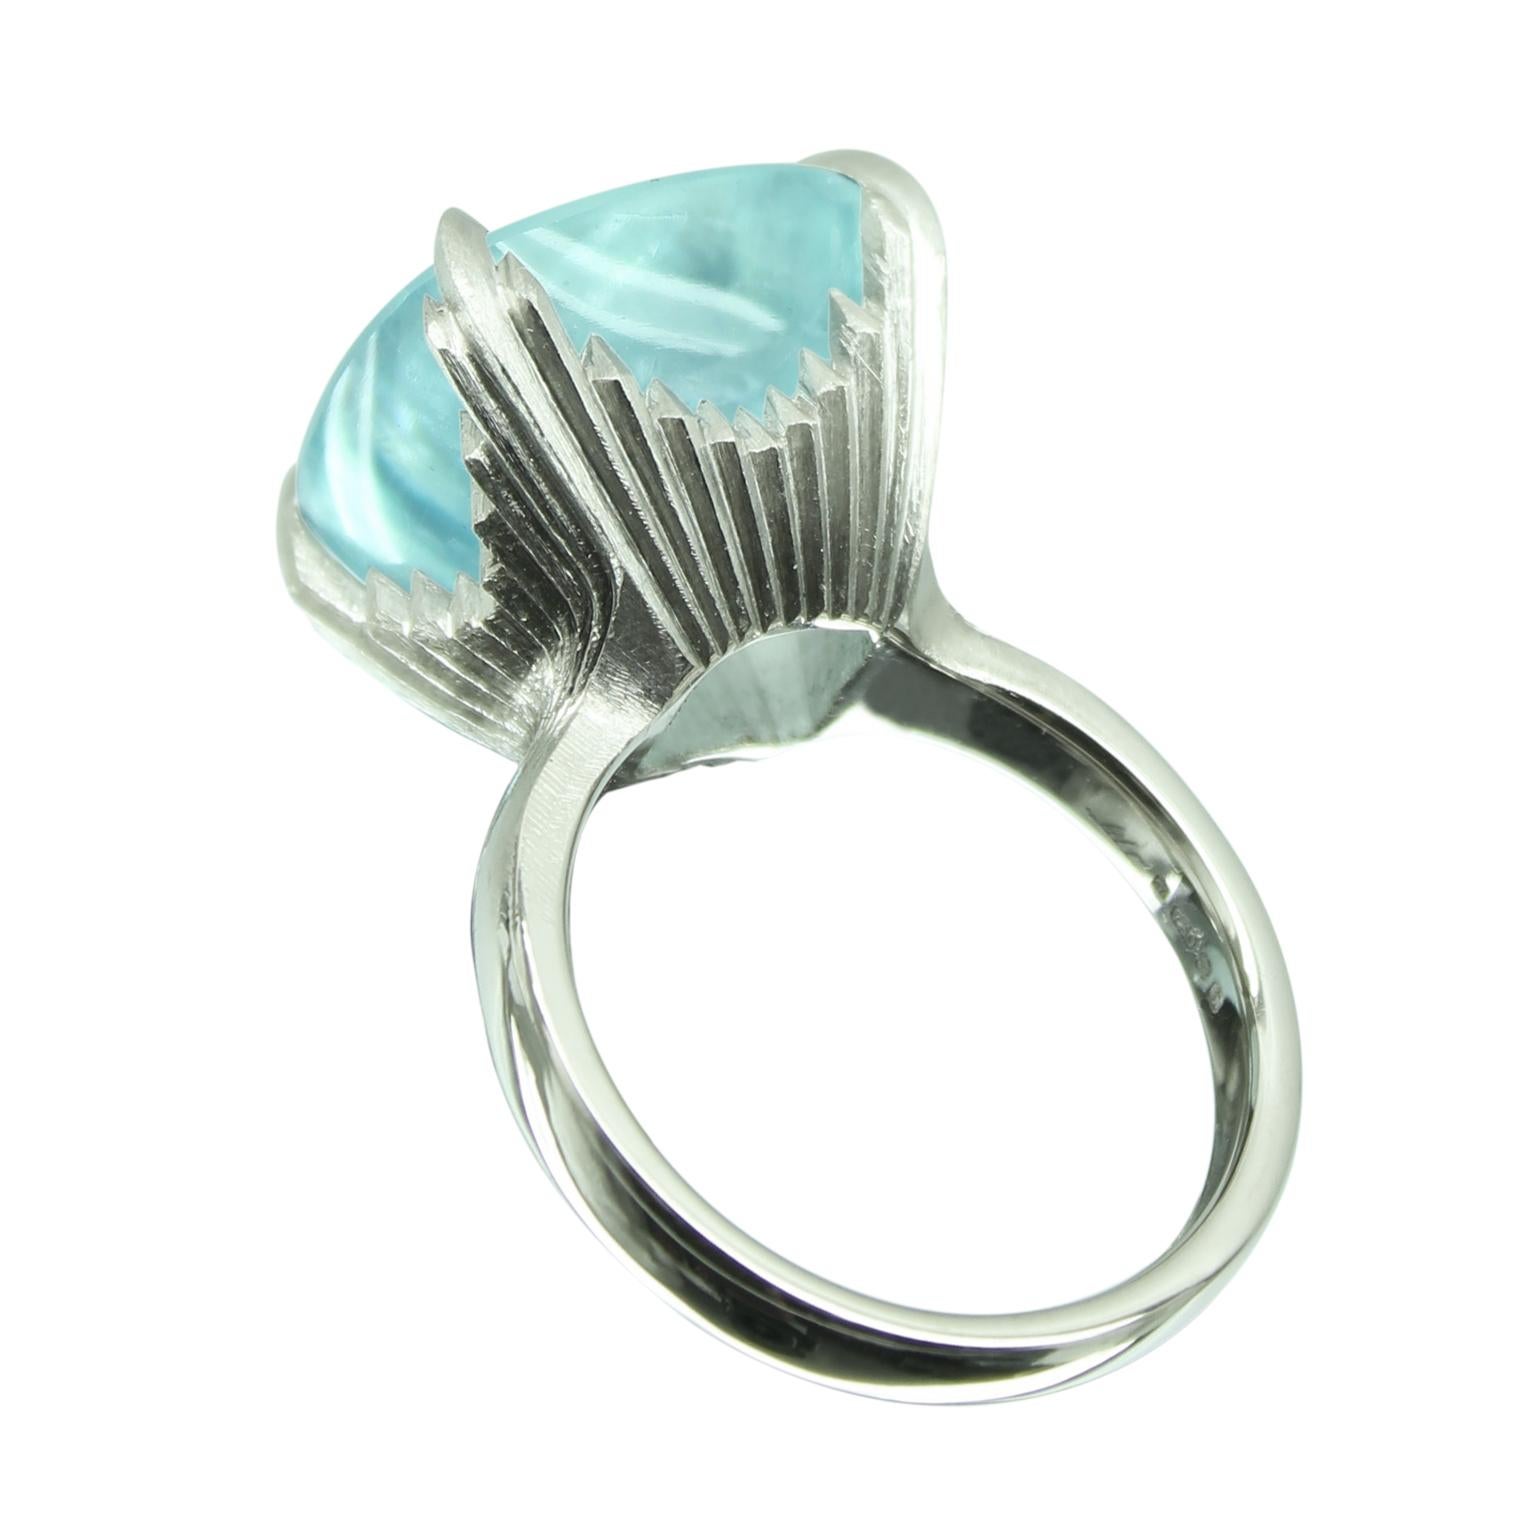 A stunning one-off 16 ct buff top cushion cut deep aquamarine stone, set into a four claw 18ct white gold ring.

The detail carries on underneath to create a raised mount of grooves and filed angles. This really catches the light as you move the